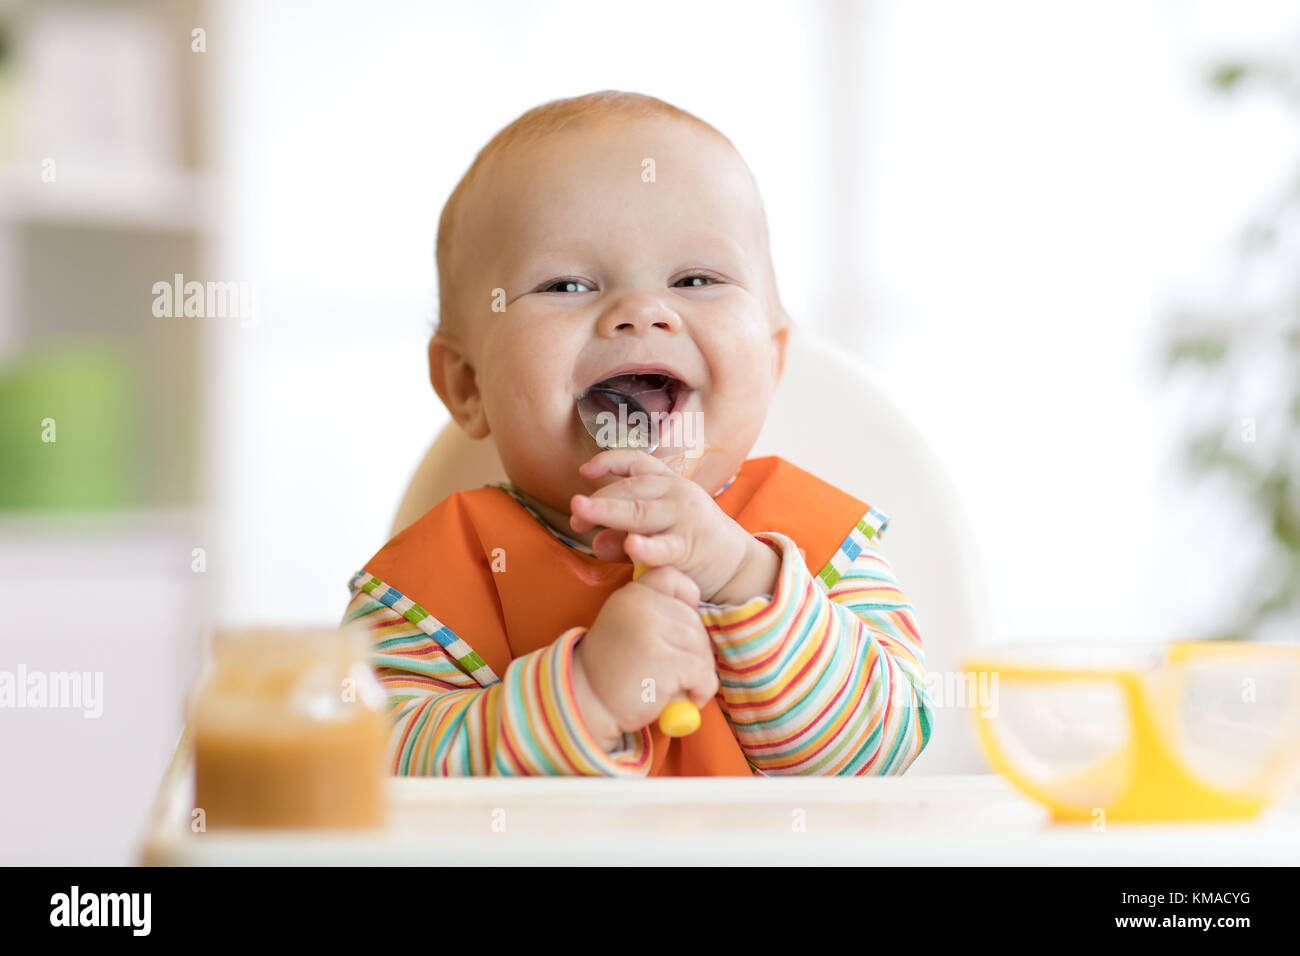 Cheerful baby child eats food itself with spoon. Portrait of happy kid boy in high-chair. Stock Photo